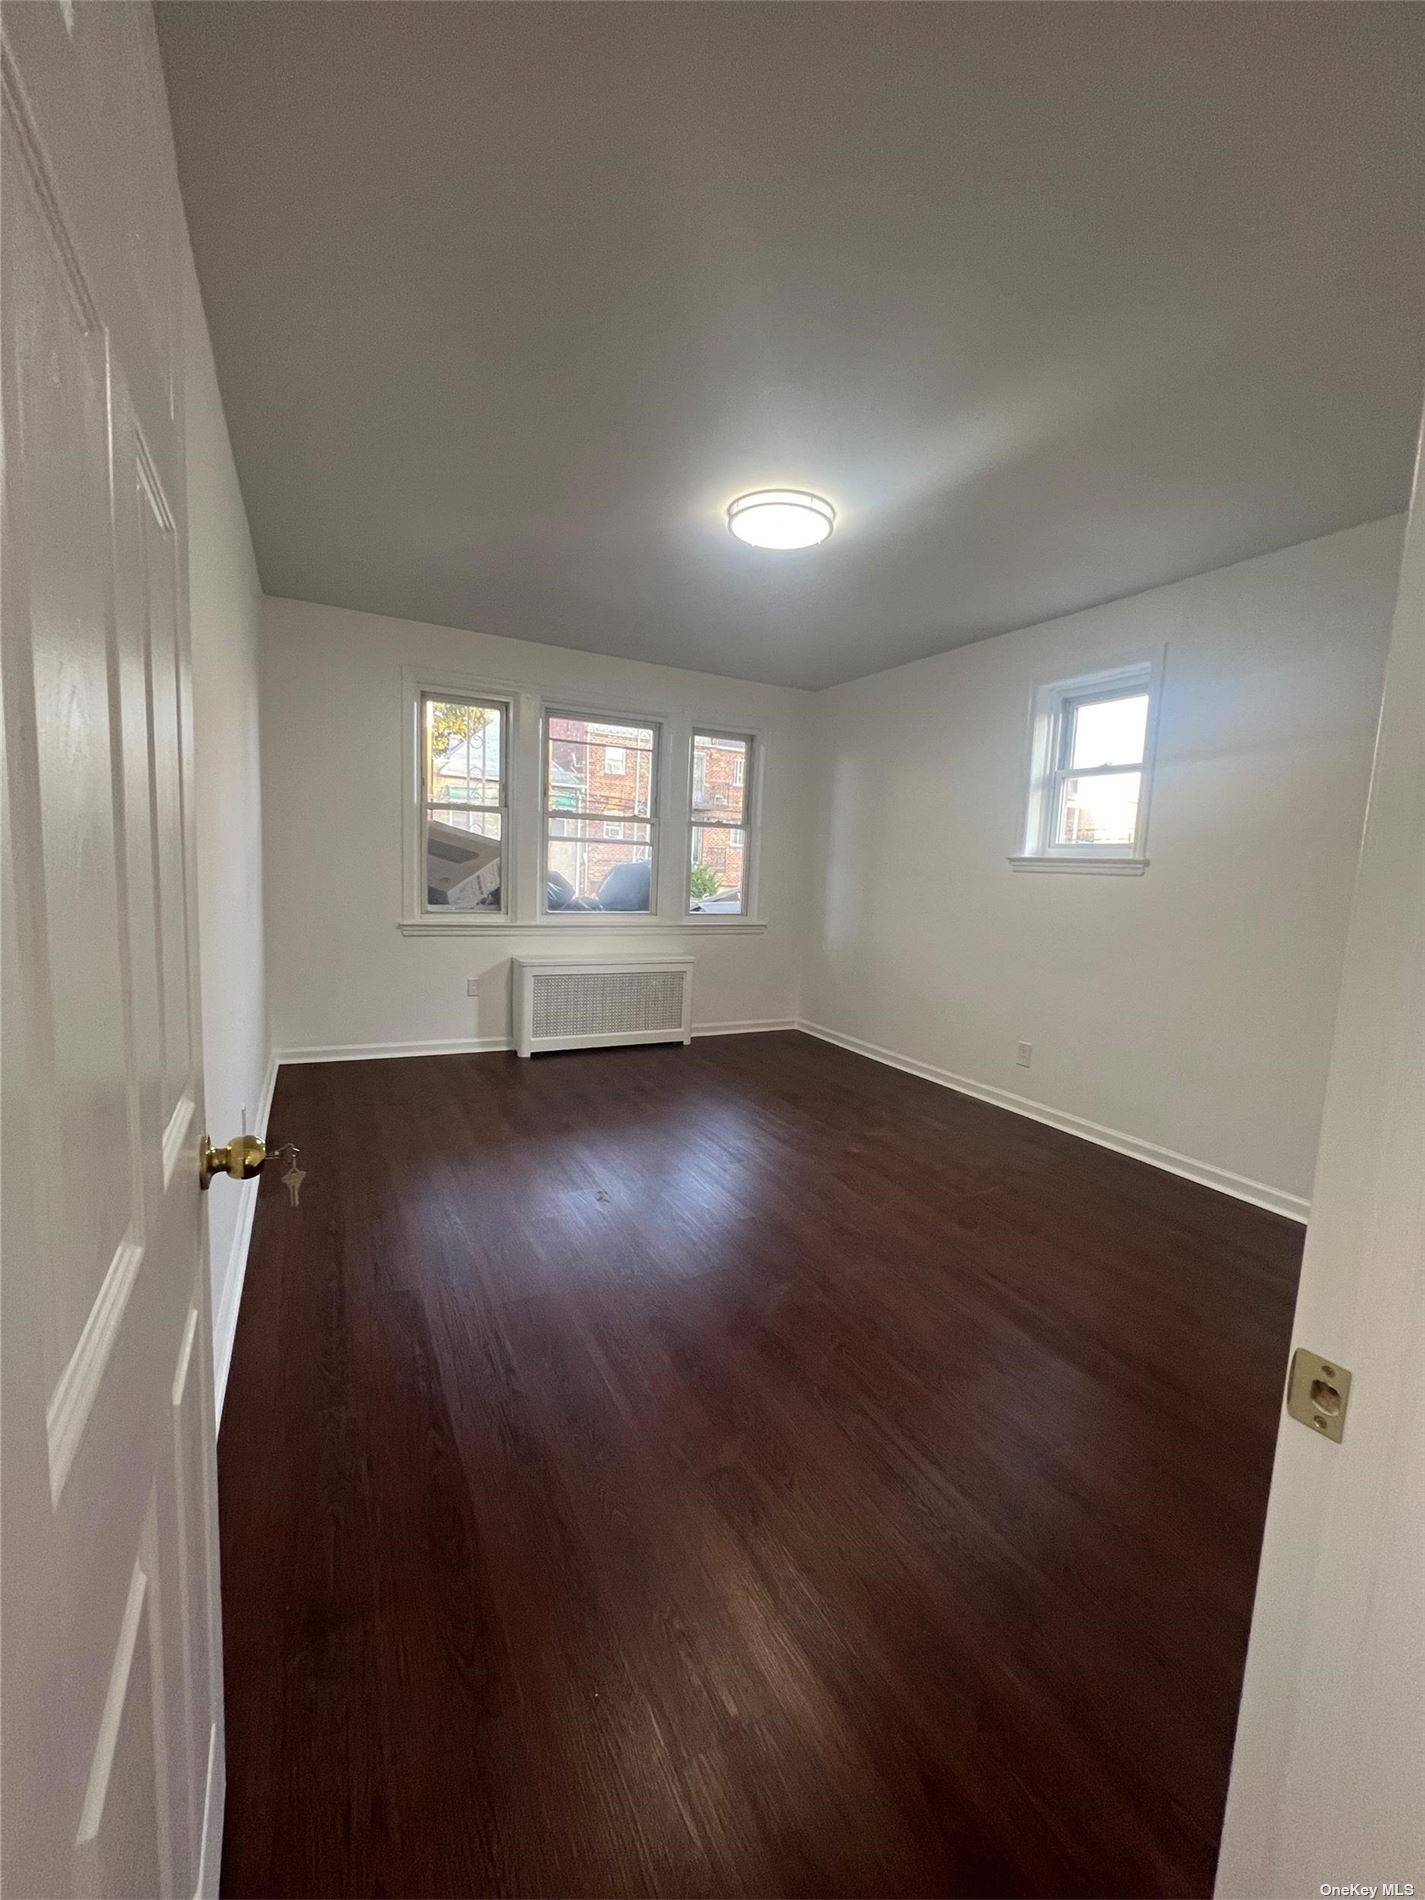 Completely remodeled three bedroom, one full bath, kitchen and living space in the heart of woodside.